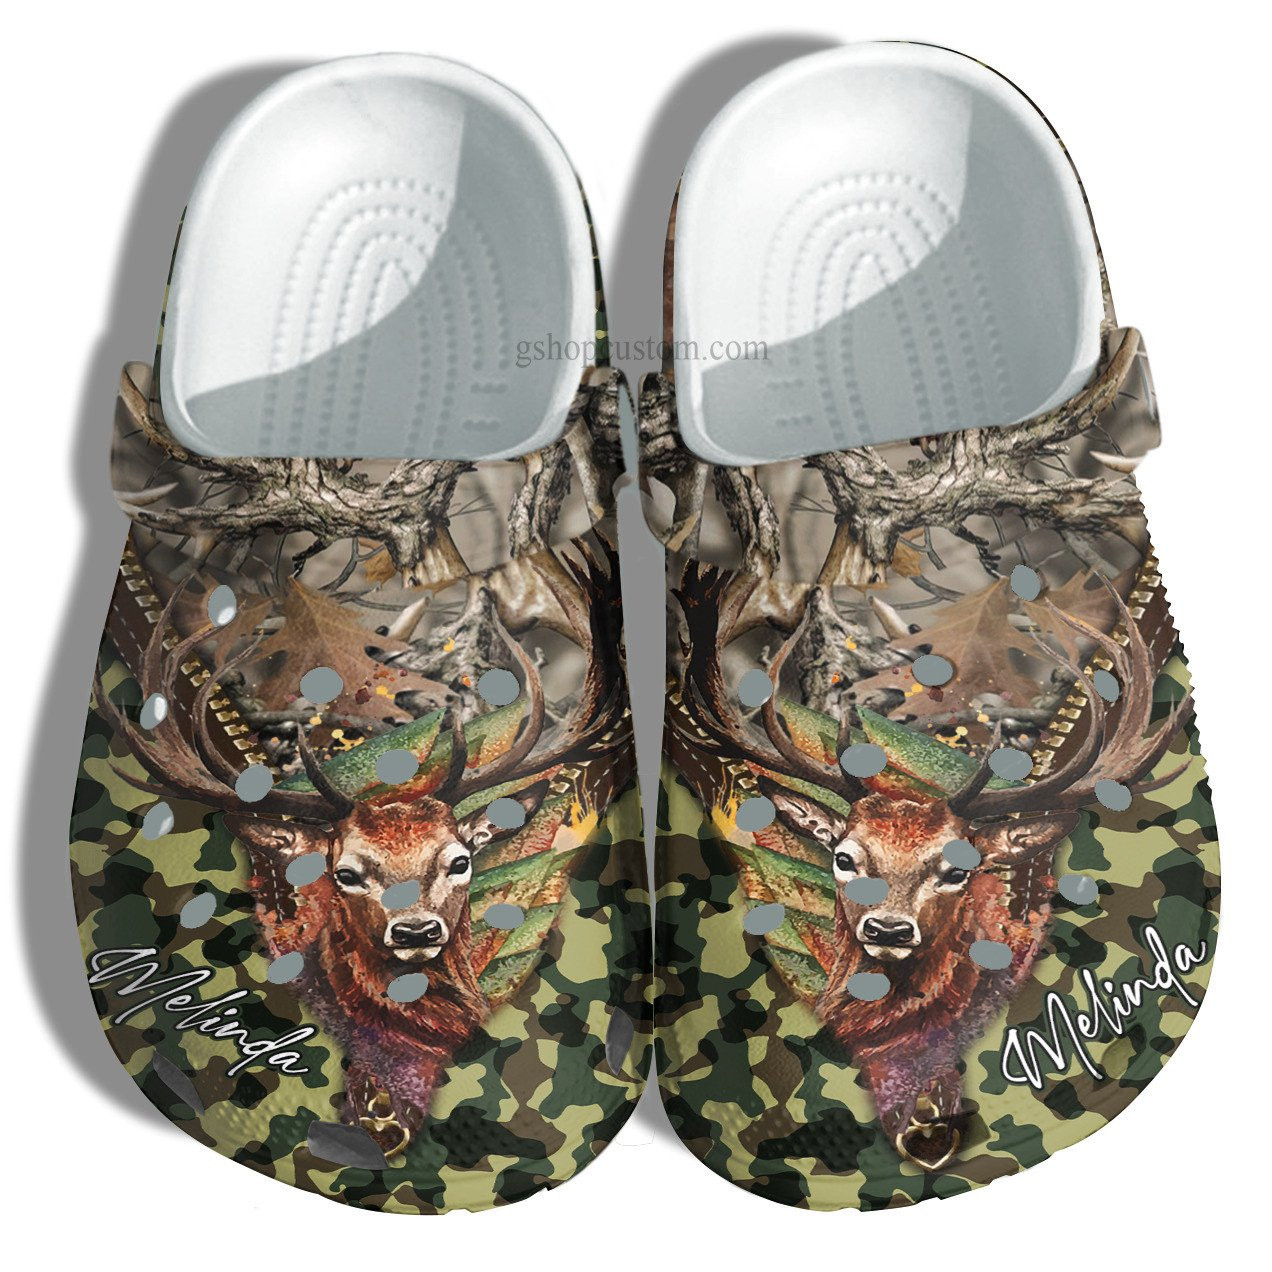 Deer Hunter Camouflage Croc Shoes Gift Father Day- Deer Hunter Camo Army Color Crocs Shoes Gift Son